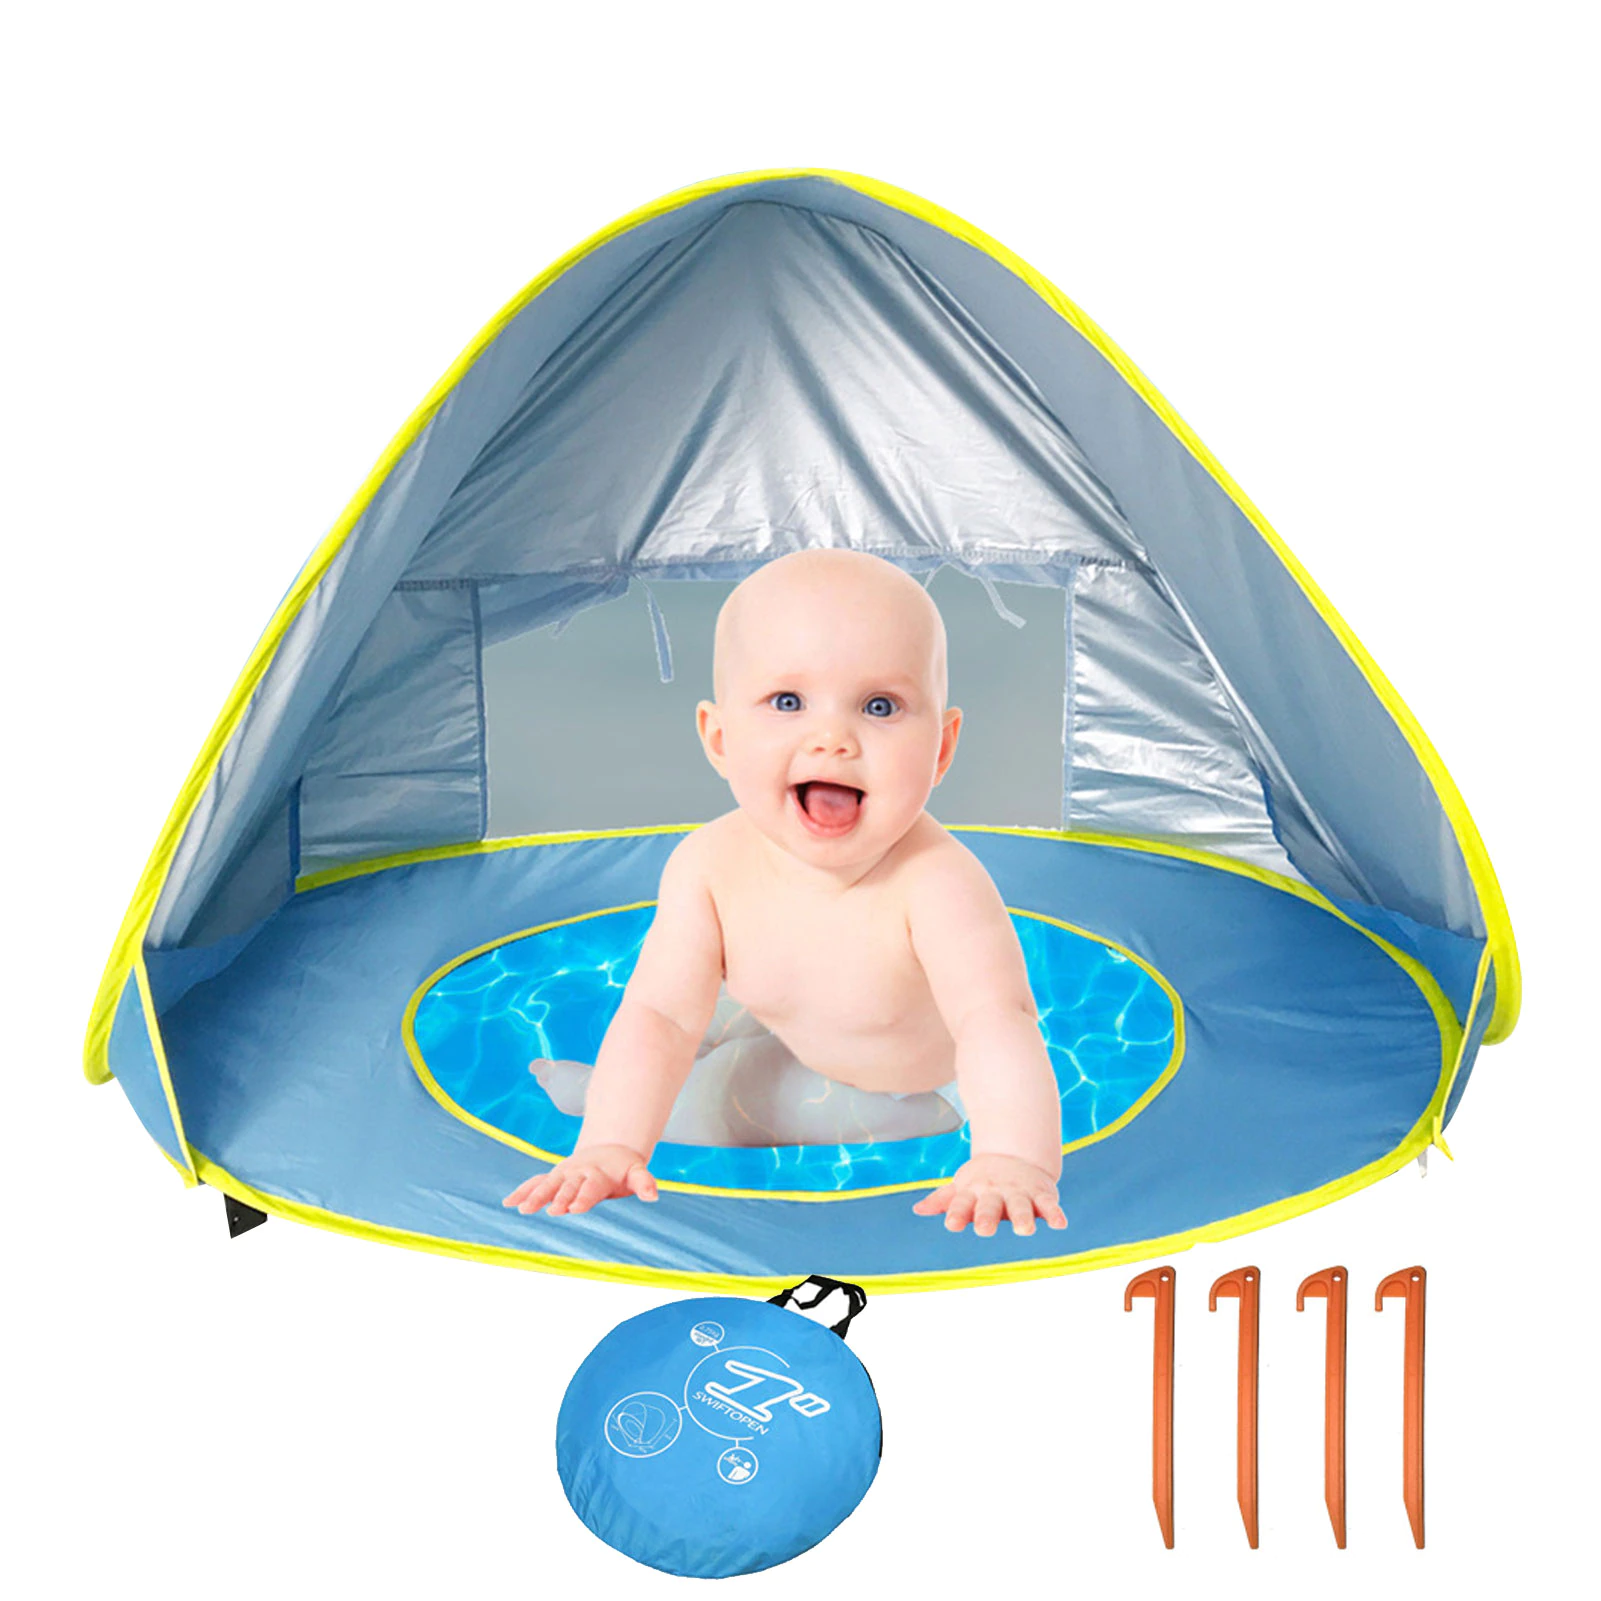 Cheap Goat Tents Baby Beach Tent With Pool Portable Foldable Sunshelter Waterproof Indoor Outdoor Camping Sunshade Beach Tent For Children Kids